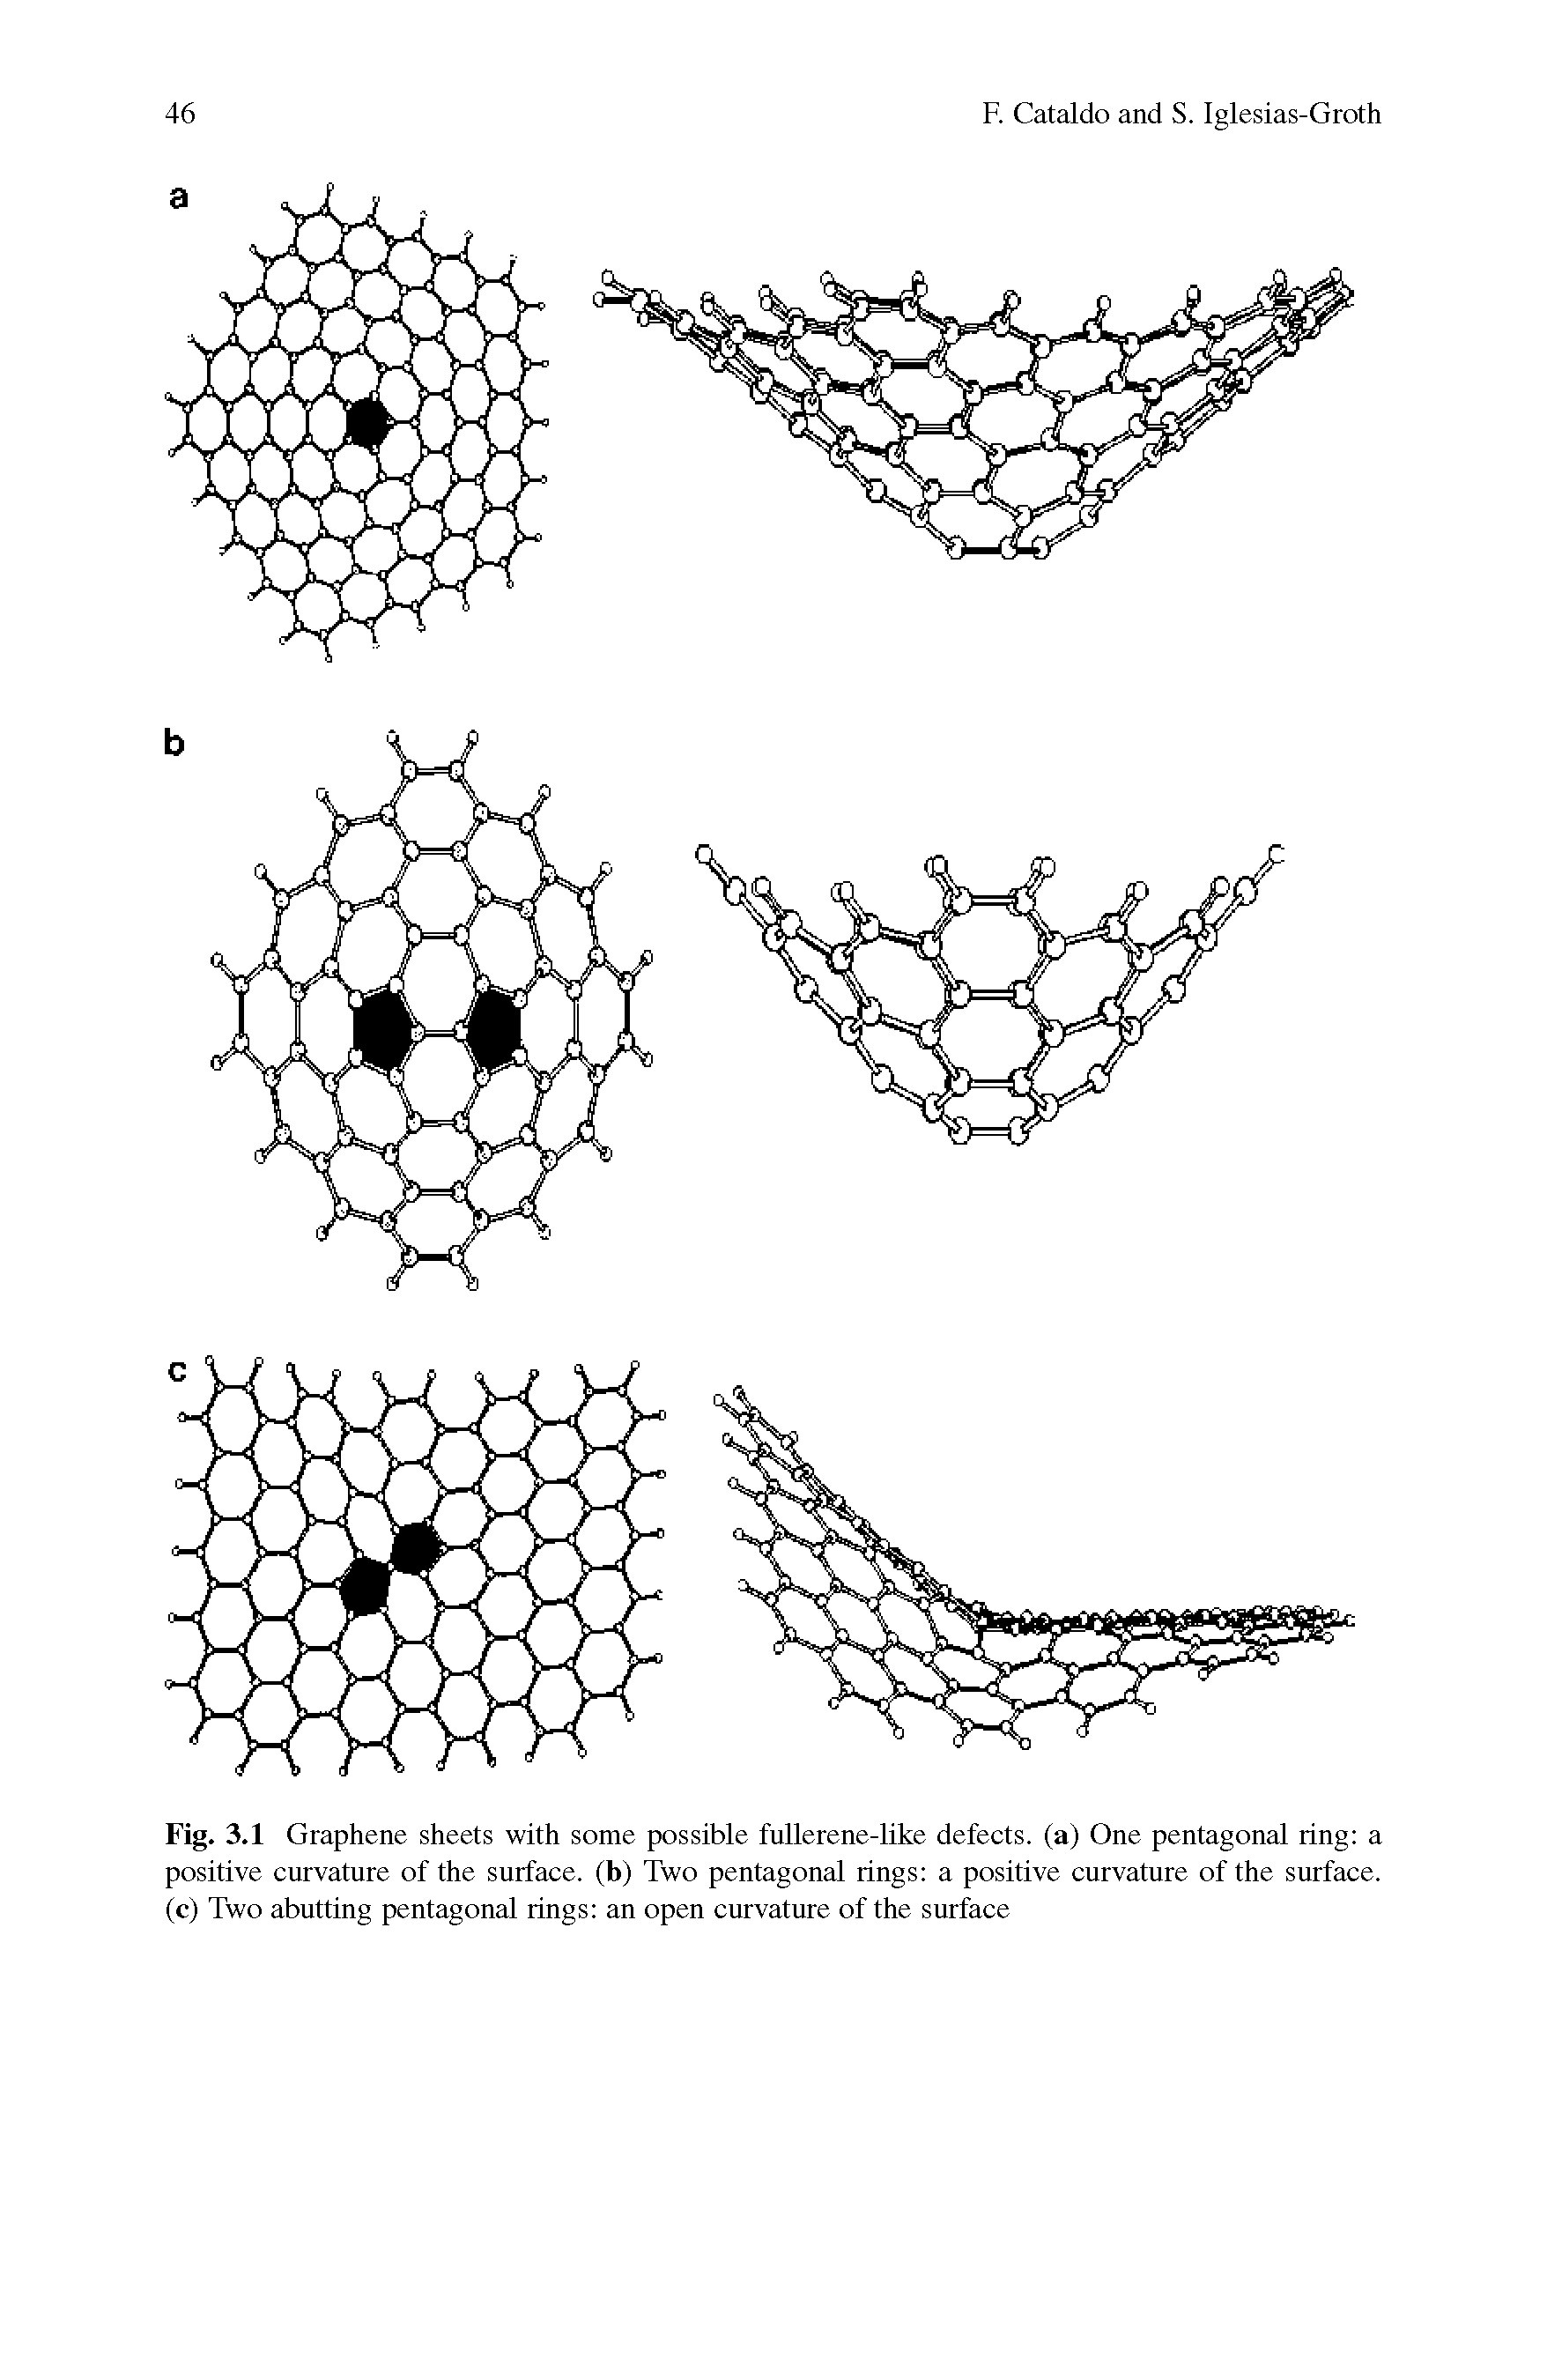 Fig. 3.1 Graphene sheets with some possible fullerene-like defects, (a) One pentagonal ring a positive curvature of the surface, (b) Two pentagonal rings a positive curvature of the surface, (c) Two abutting pentagonal rings an open curvature of the surface...